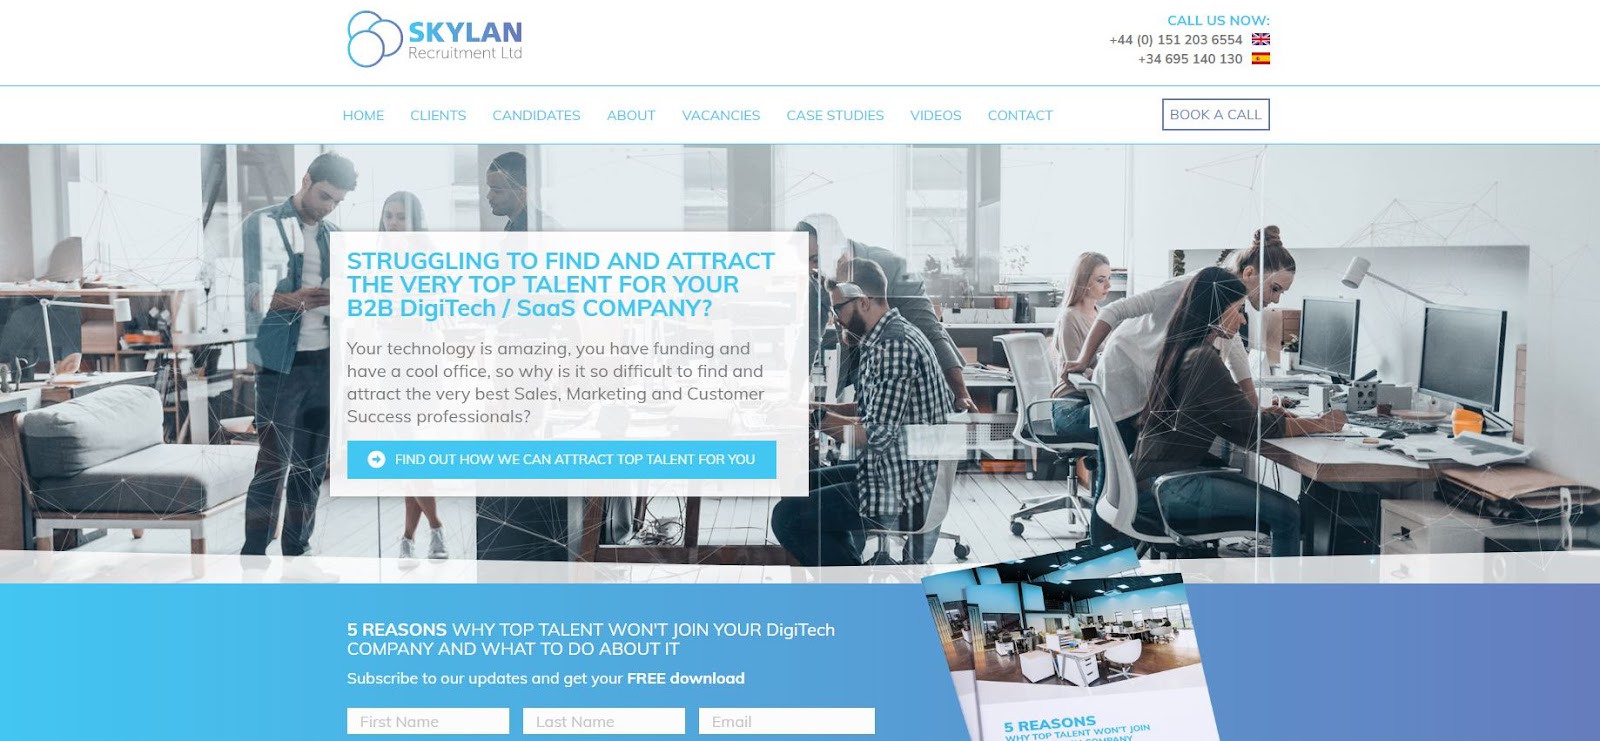 SKYLAN Recruitment is a staffing and recruiting startup that specializes in providing recruitment